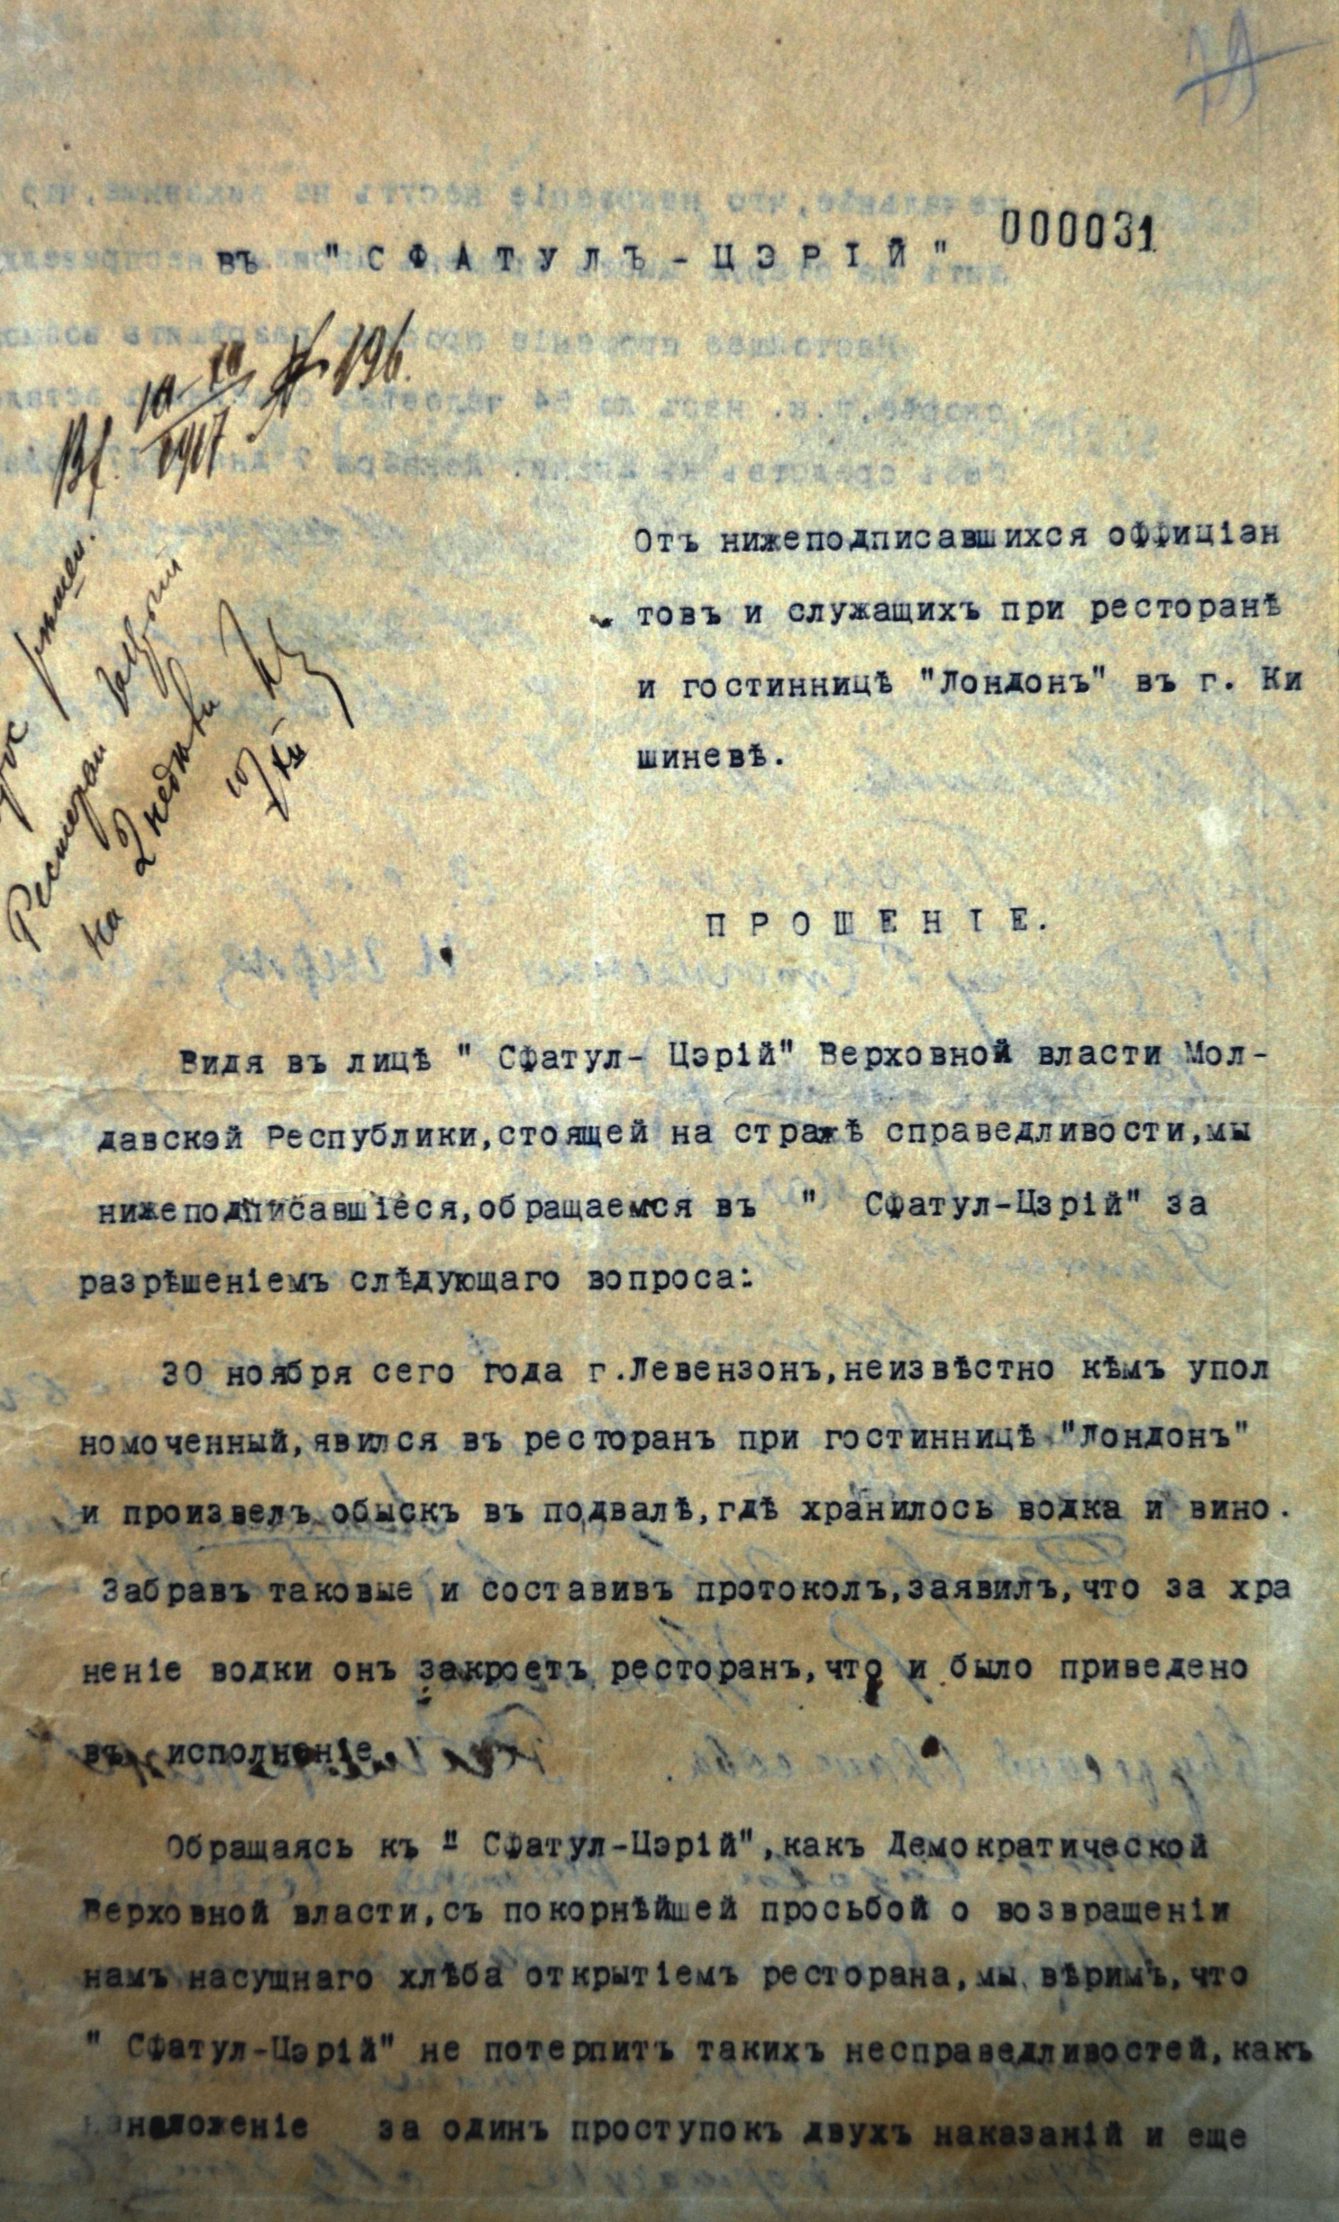 The minutes of the meeting of the Romanian (Moldovan) deputies who left the first congress of the Bessarabian peasants due to the discriminatory attitude of the Russian-speaking MPs to the natural desire of the representatives of the majority population to use the Romanian language, along with the Russian, Congress Works, 21 May 1917 (National Archives of the Republic of Moldova)